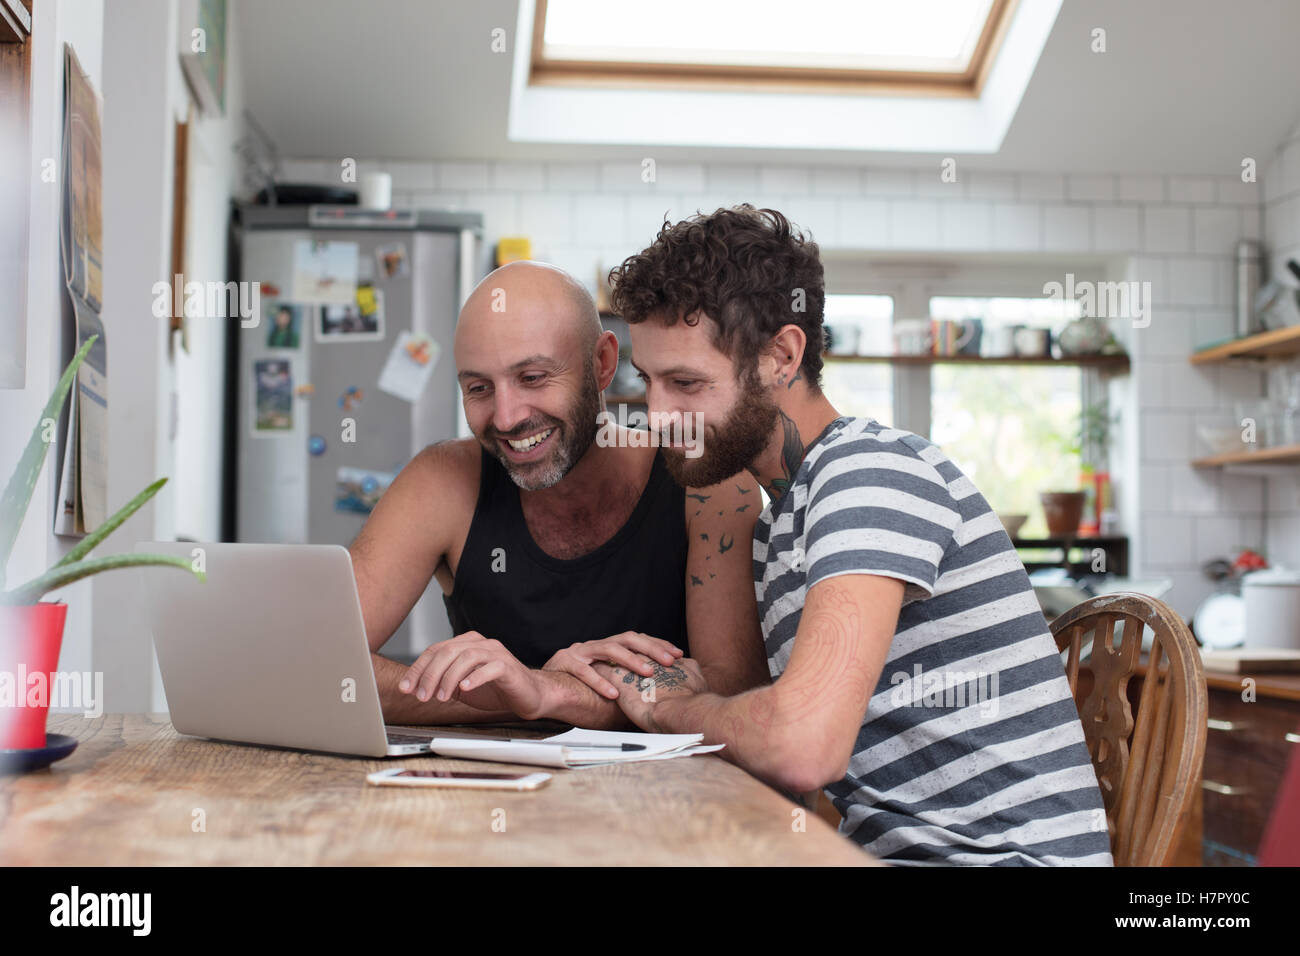 Gay couple using laptop in kitchen Banque D'Images